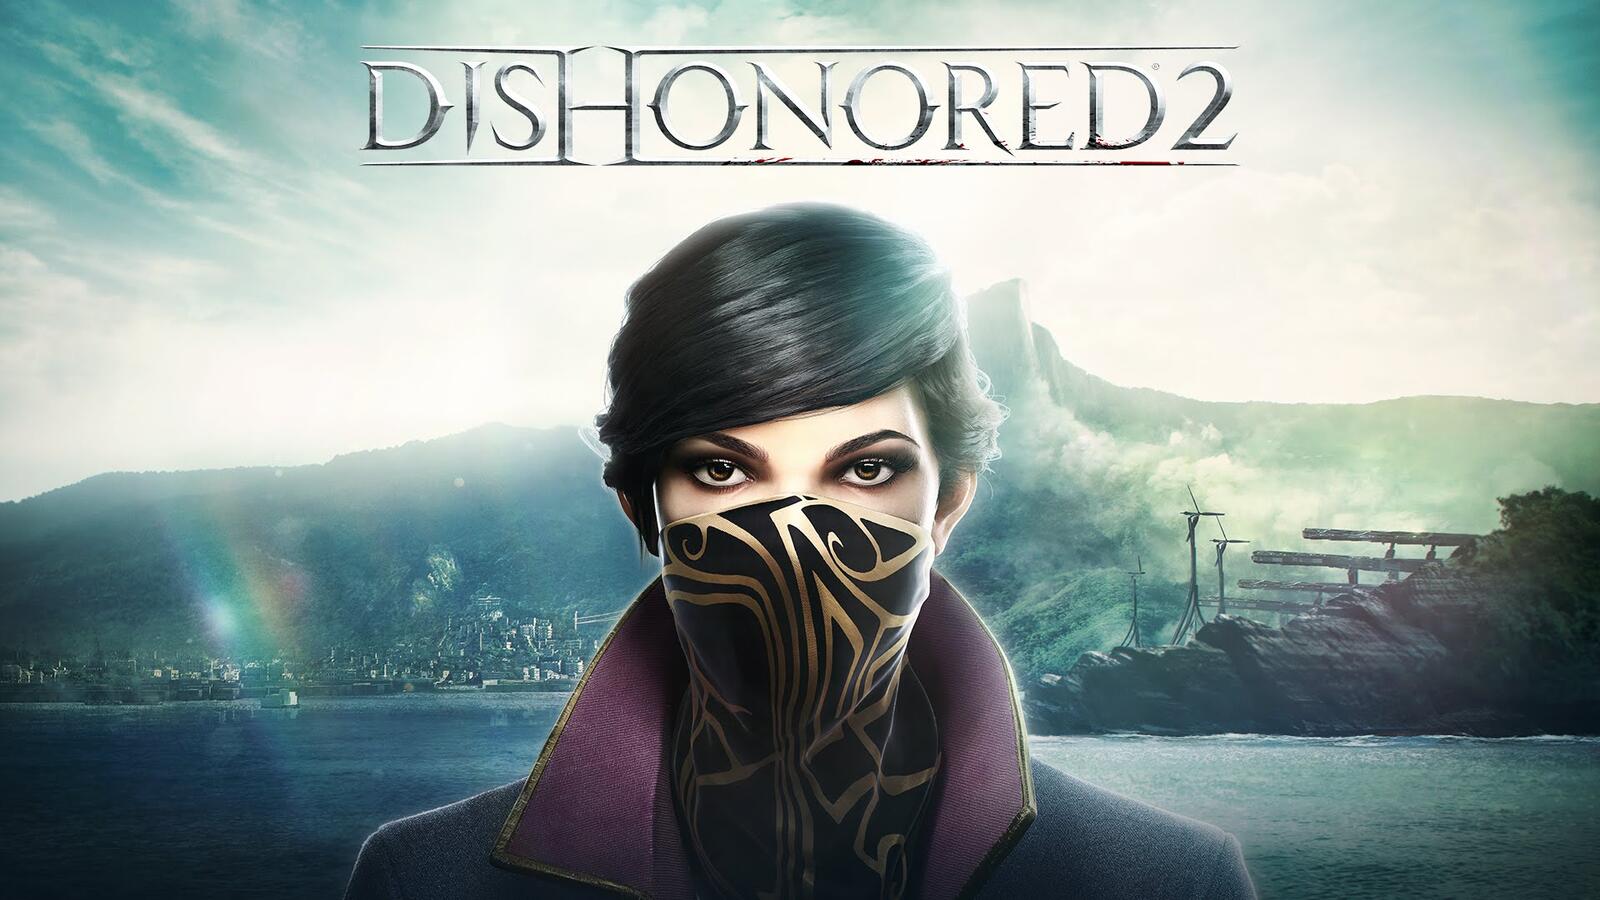 Wallpapers Emily Kaldwin game dishonored 2 on the desktop